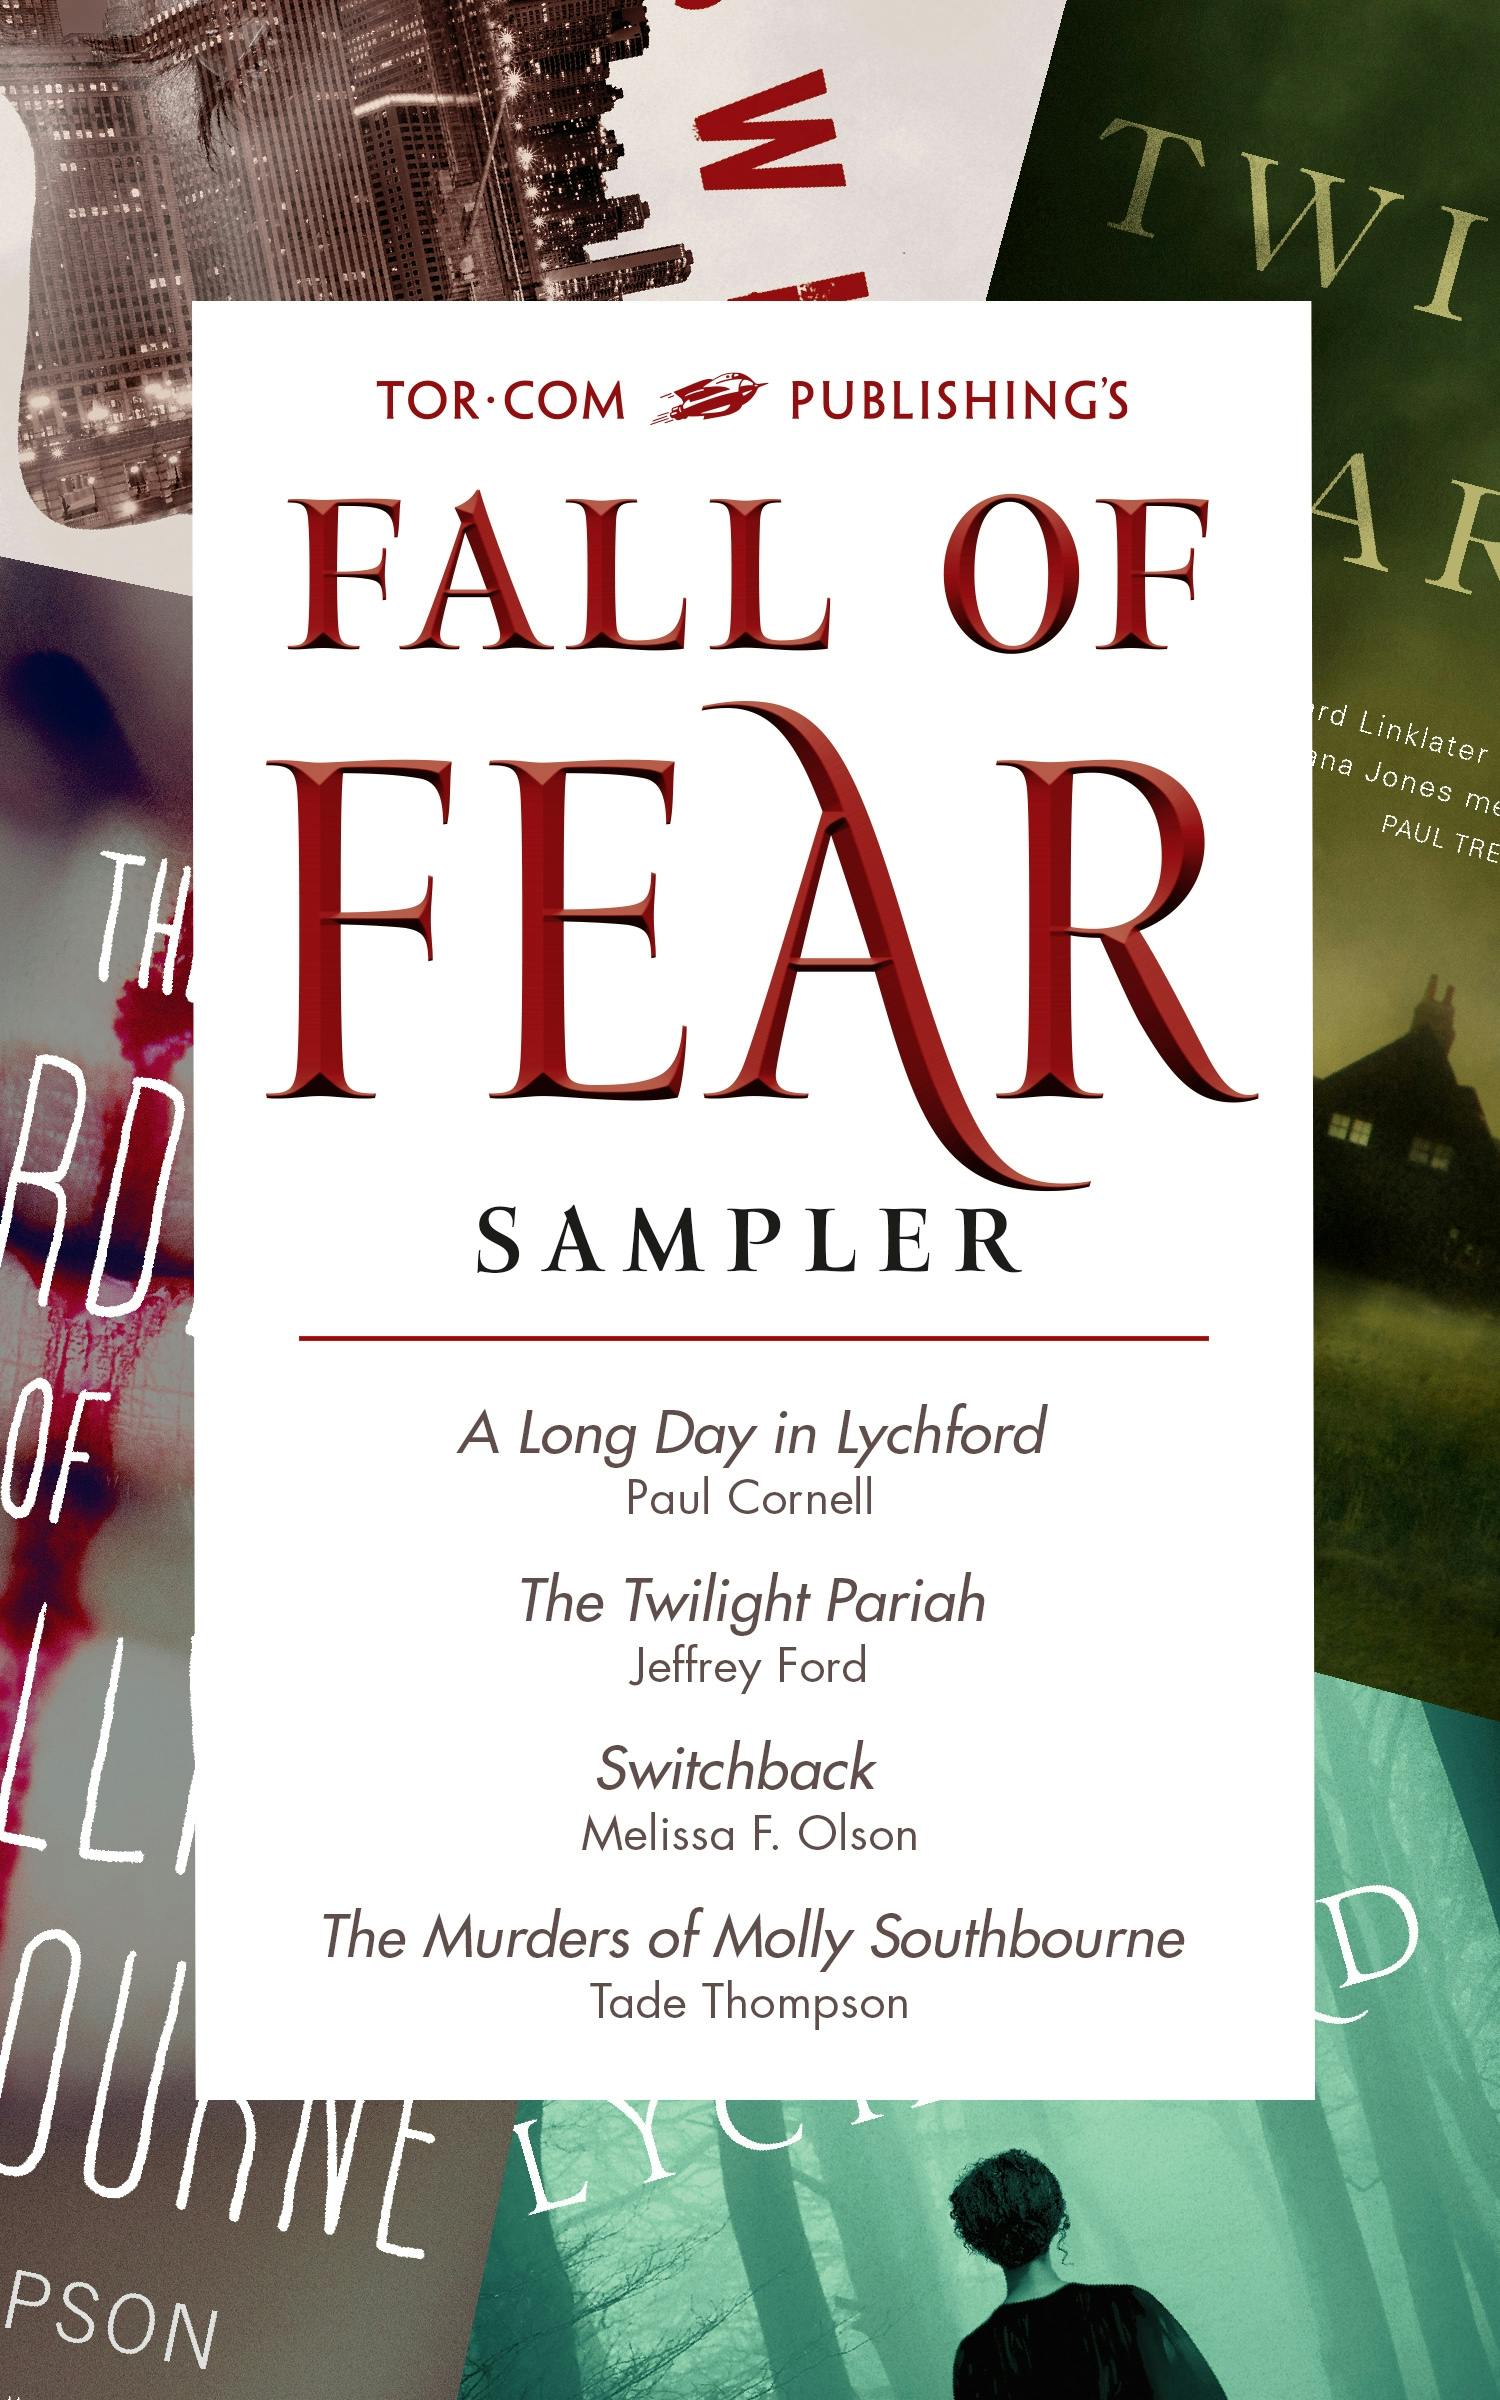 Cover for the book titled as: Tor.com Publishing's Fall of Fear Sampler